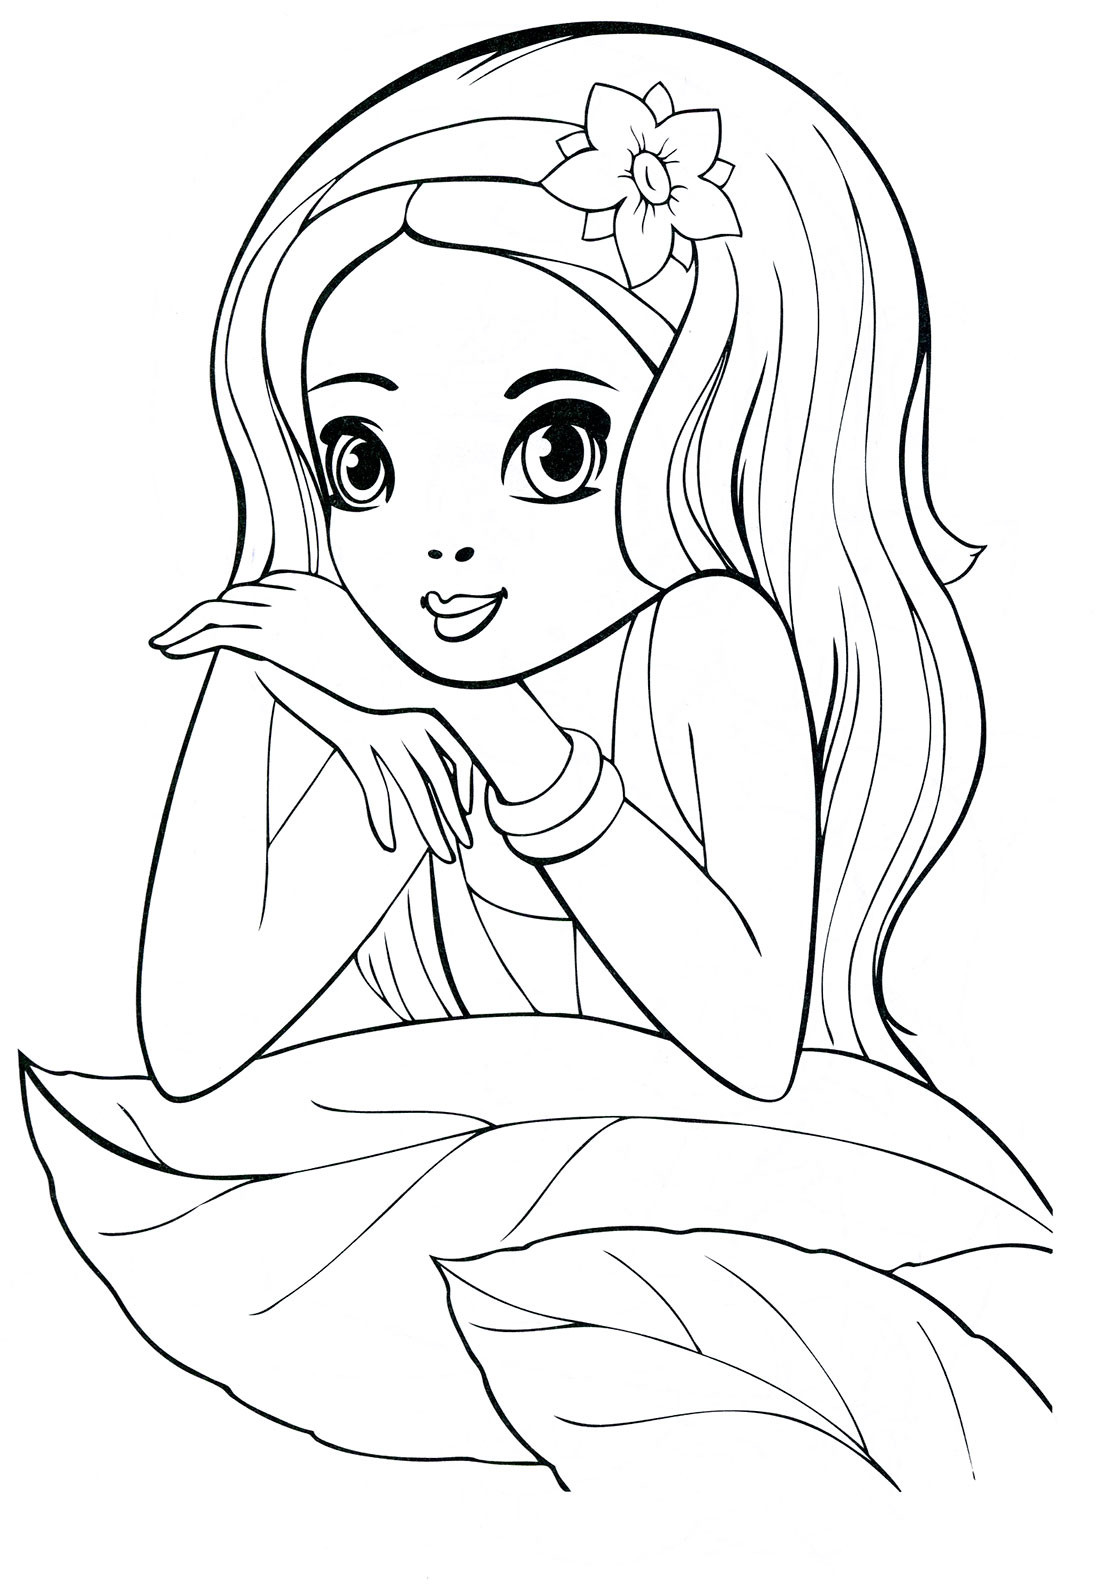 Coloring Sheets Of Girls
 Coloring pages for 8 9 10 year old girls to and